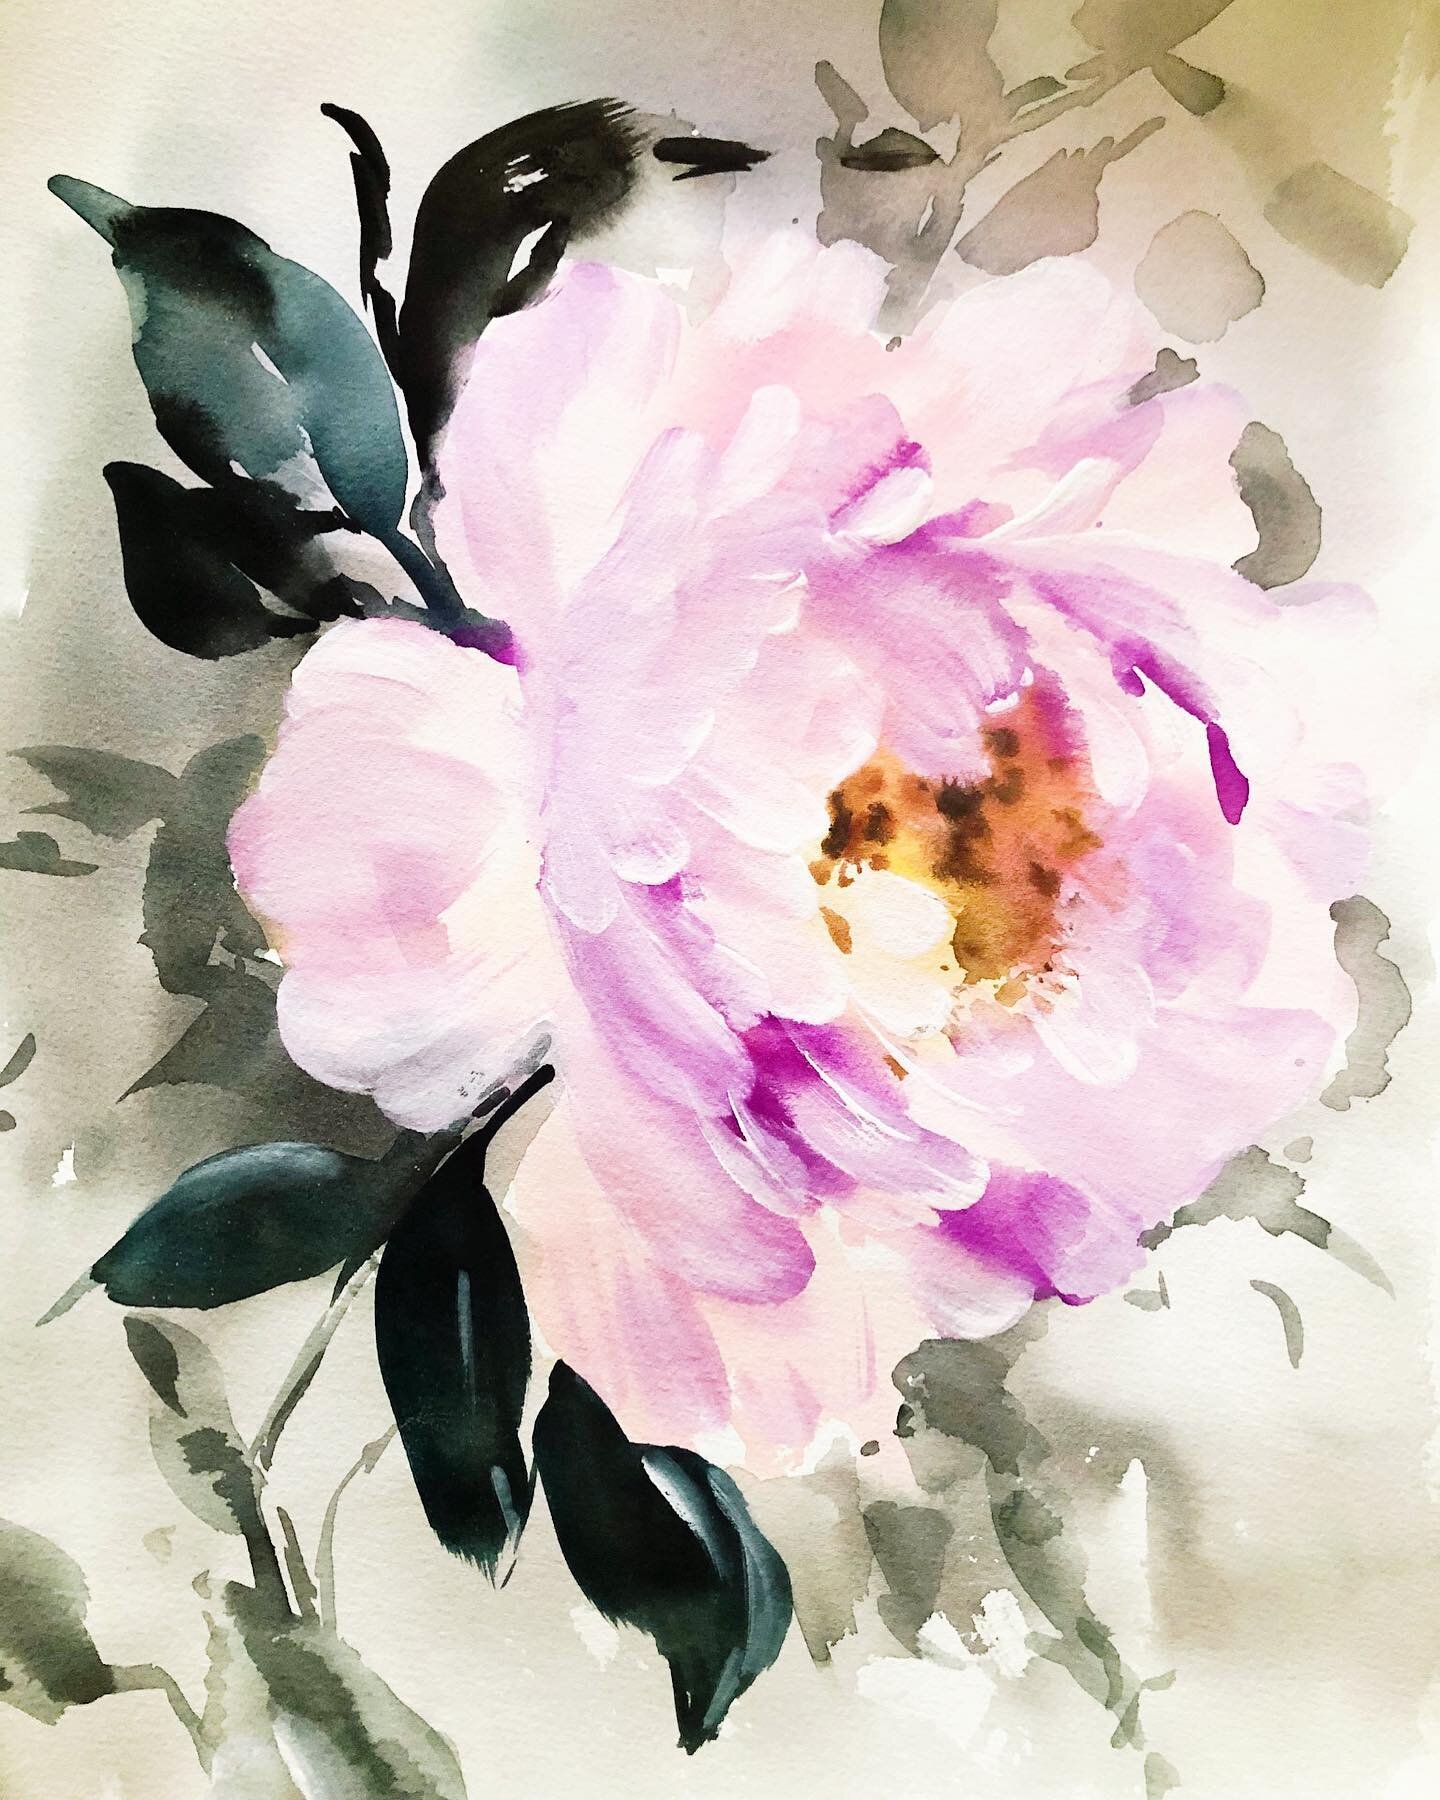 A big blousy bloom painted with watercolours and finished with white gouache to create the petals.✨
.
.
.
#flower #flowers #artofinstagram #artistsoninstagram #artoftheday #artlover #arte #artdaily #artstudio #watercolordaily #watercolorartwork #wate